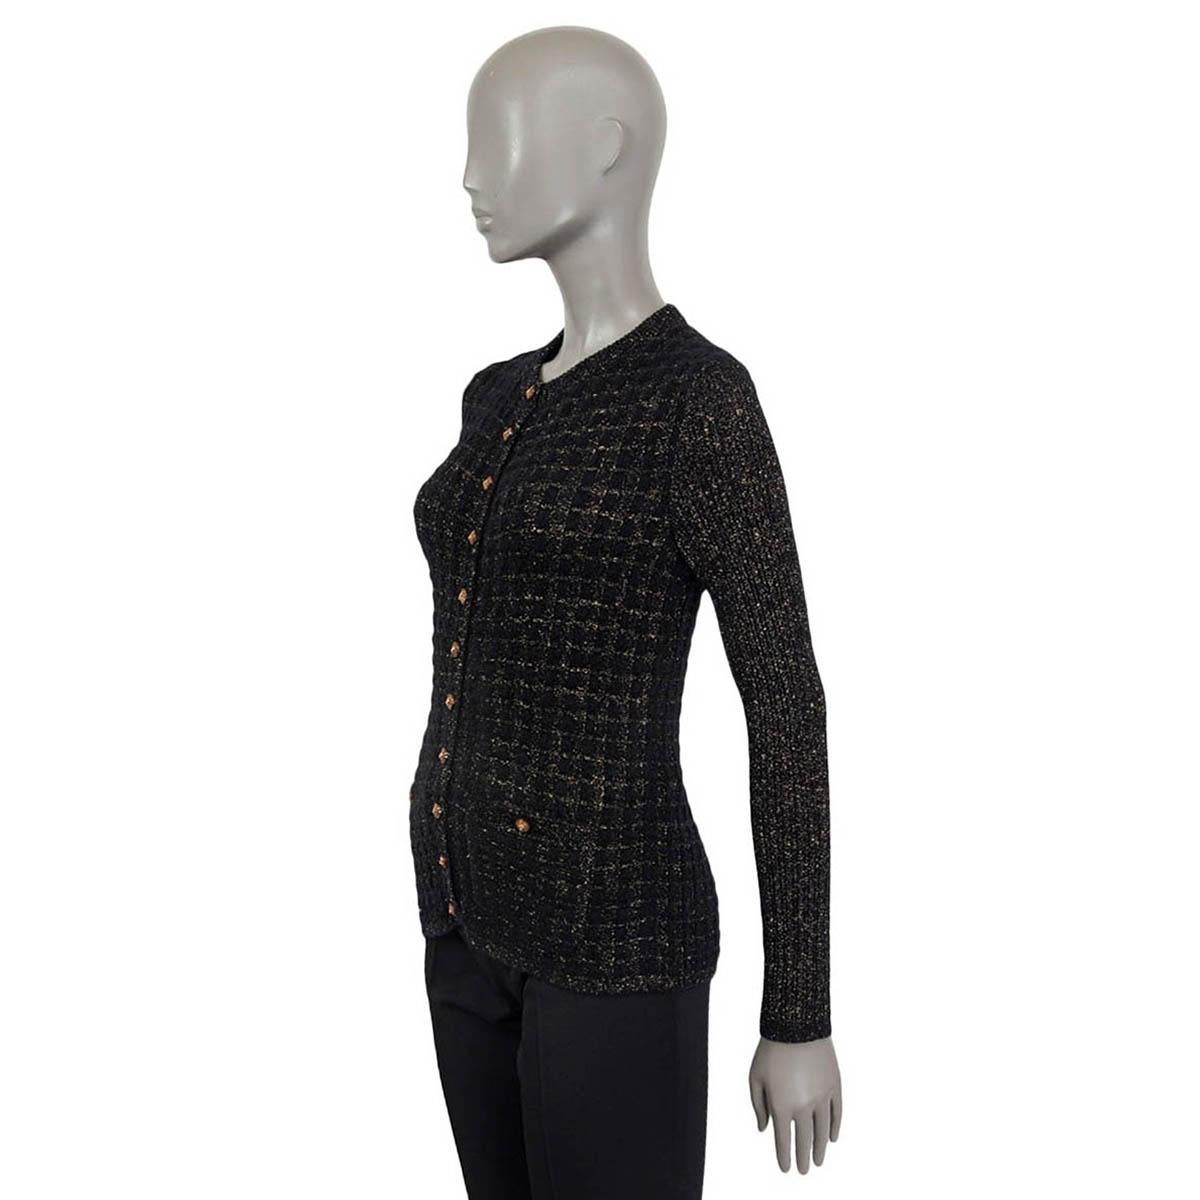 100% authentic Chanel Metiers d'Art 2017 Cosmopolite lurex cardigan in black and gold viscose (71%), polyester (24%), mohair (2%), nylon (2%) and wool (1%). Features long sleeves and two buttoned patch pockets on the front. Opens with eleven buttons